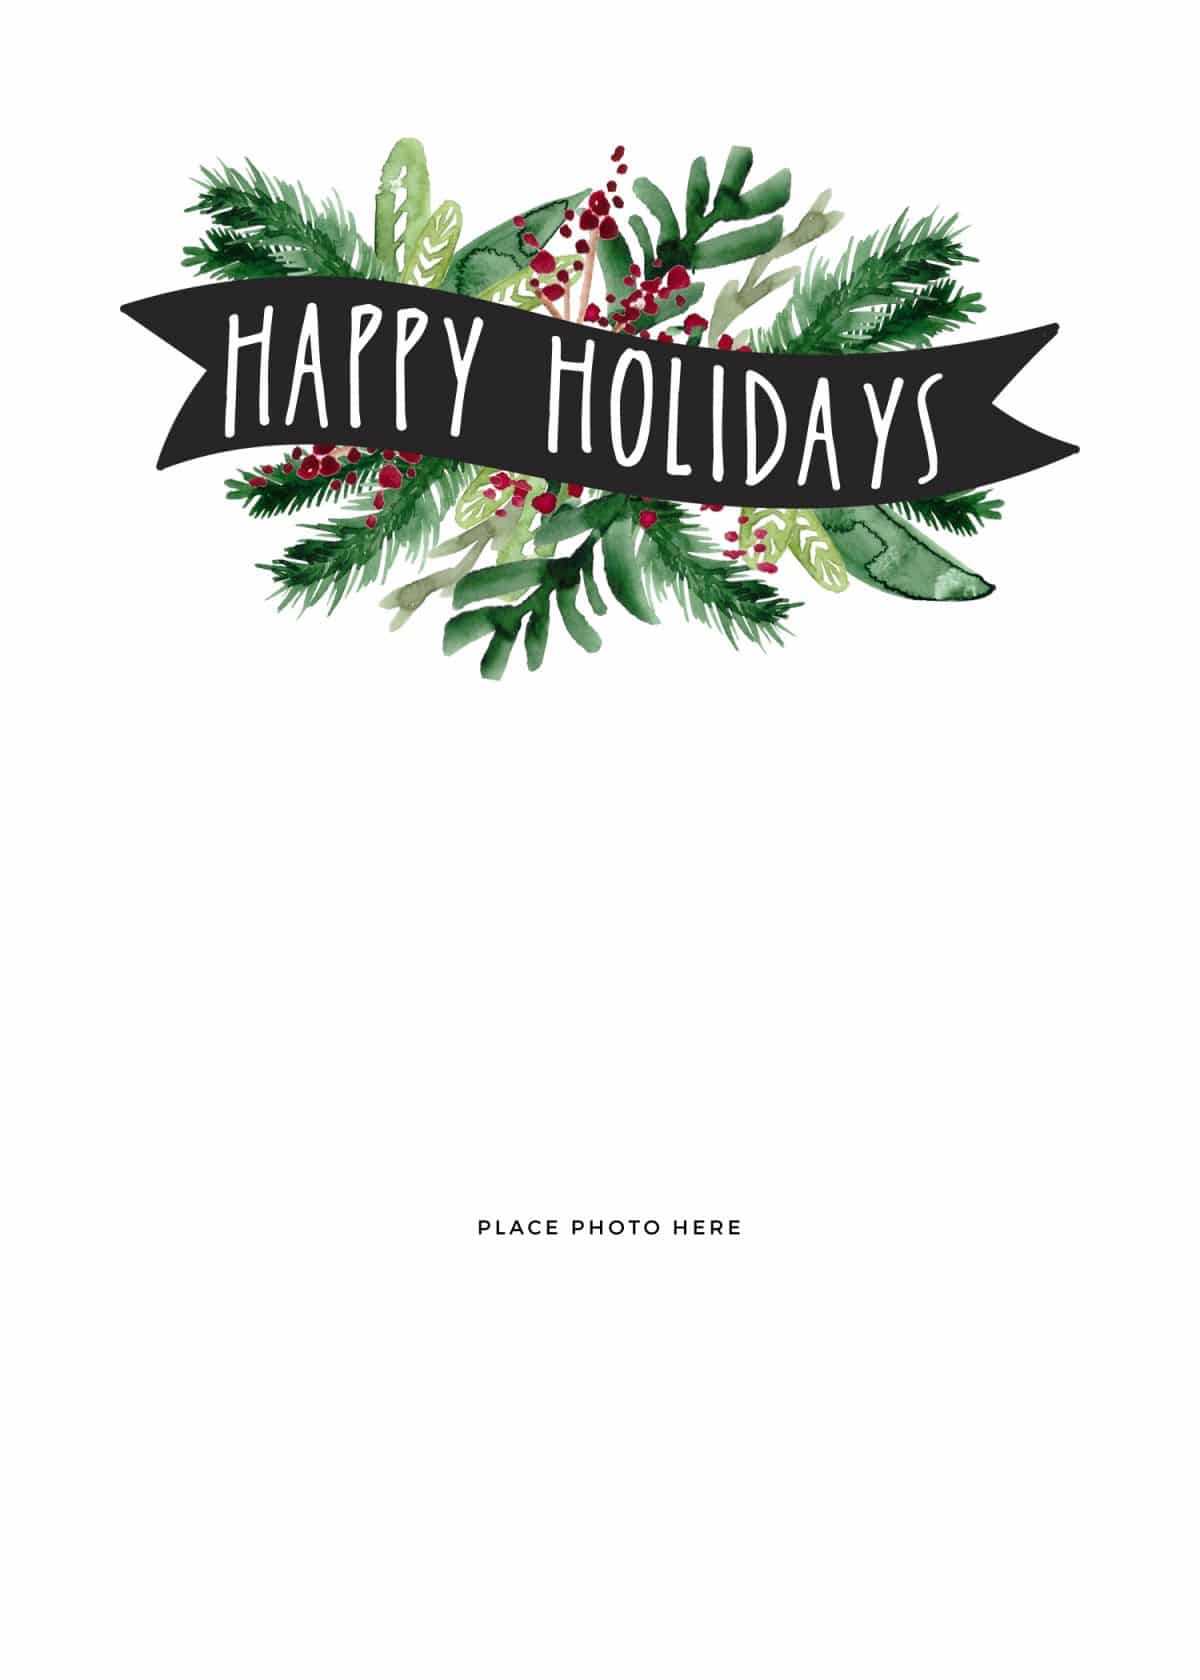 Make Your Own Photo Christmas Cards (For Free!) - Somewhat Inside Free Holiday Photo Card Templates